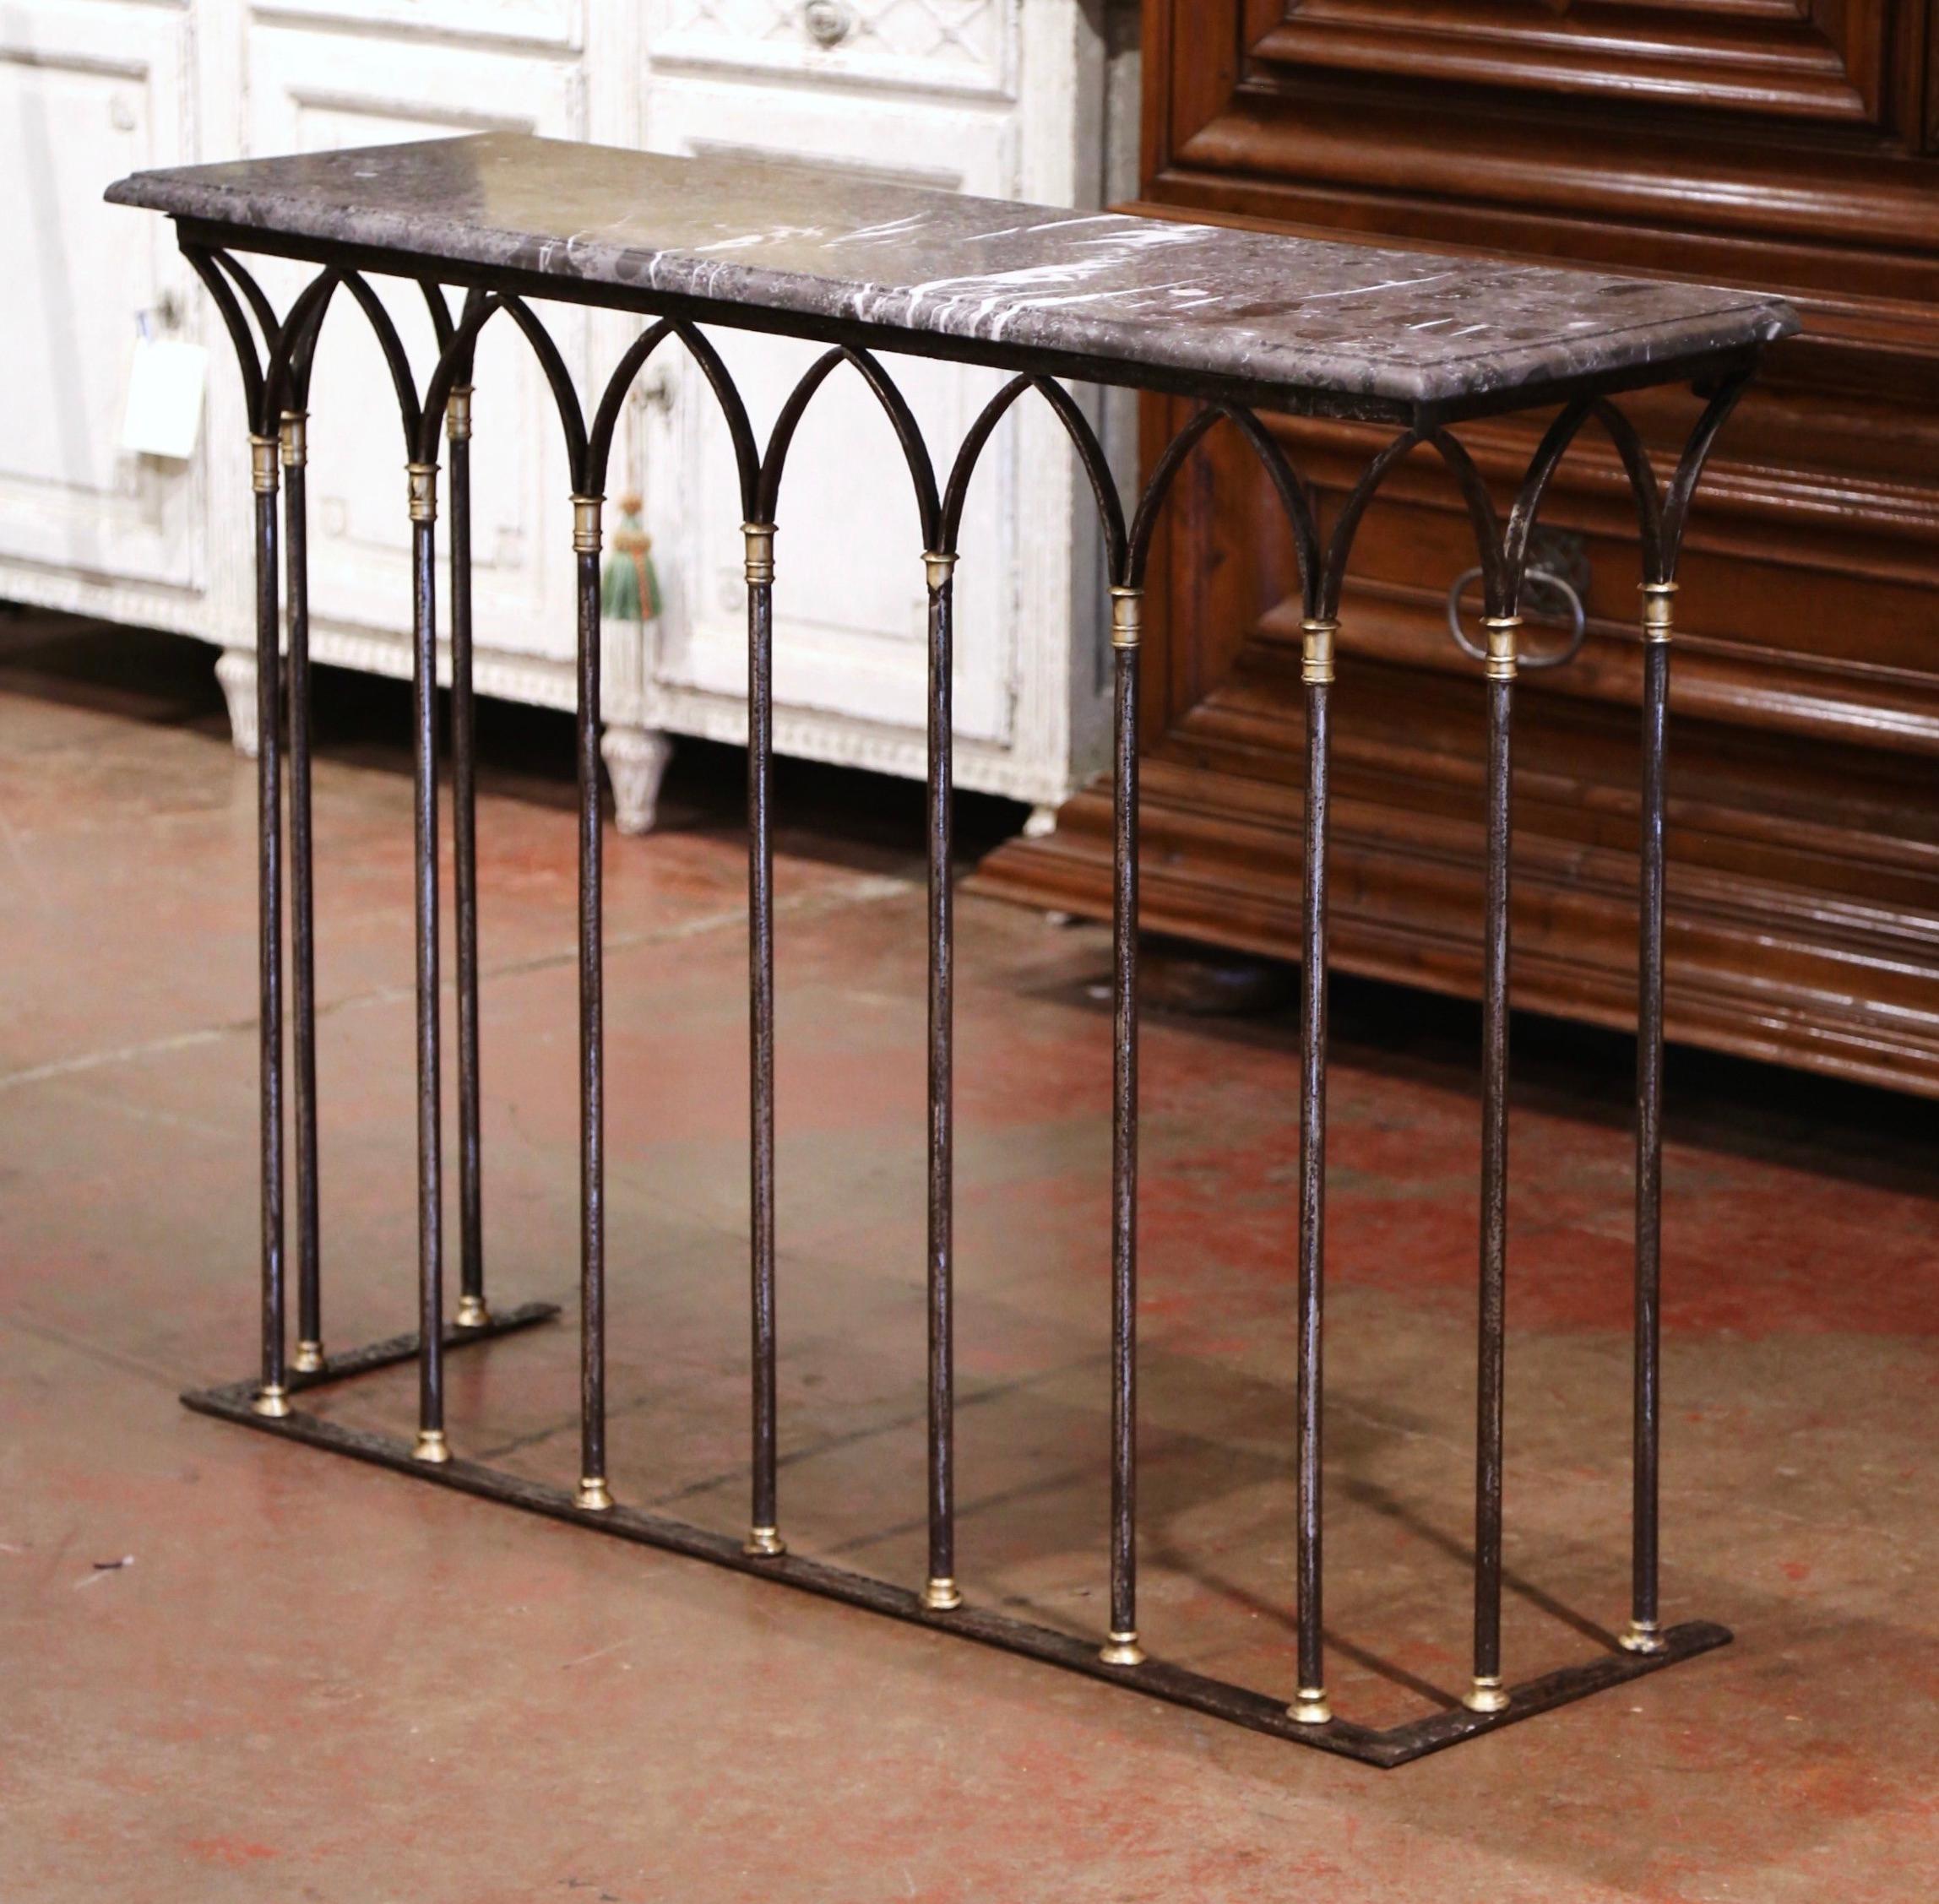 Crafted in France circa 1780, the antique console table features intricate forged cathedral shaped columns on all three sides embellished with decorative bronze rings at the top and bottom. The rectangular table is dressed with a thick variegated